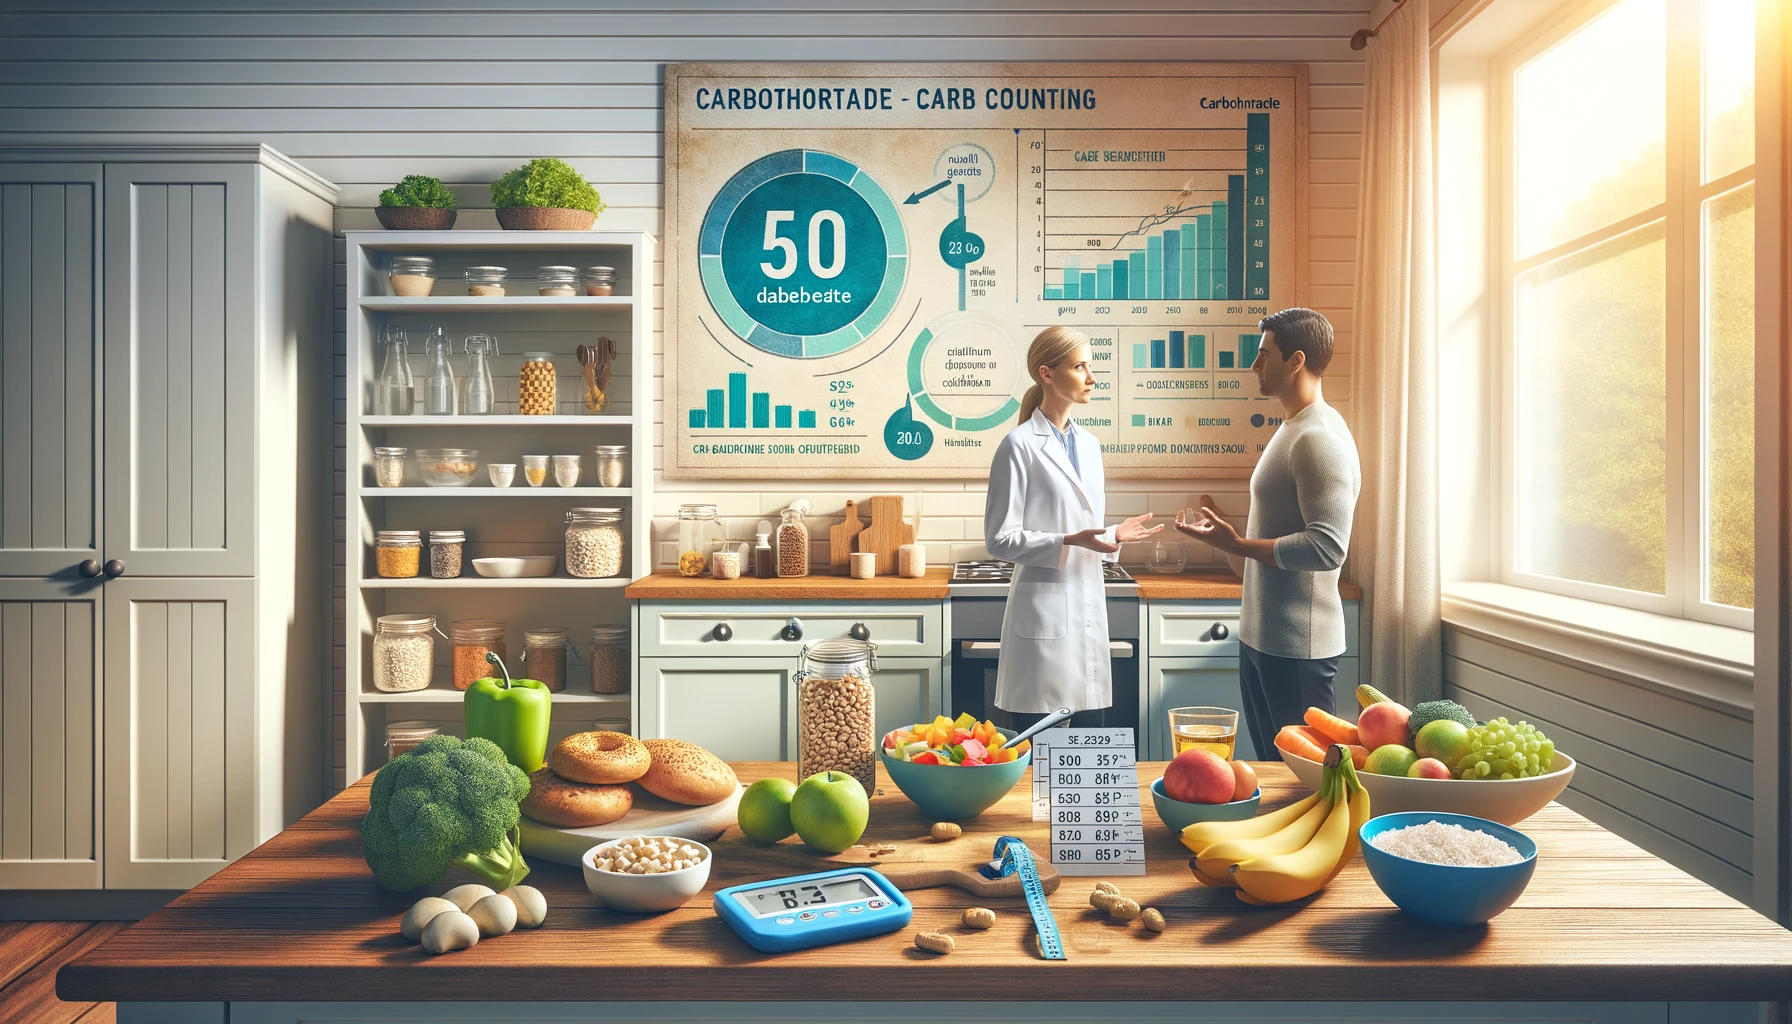 Healthcare professional explaining carb counting to a patient in a kitchen with foods labeled for carbohydrate content, and an insulin-to-carb ratio infographic on the wall.